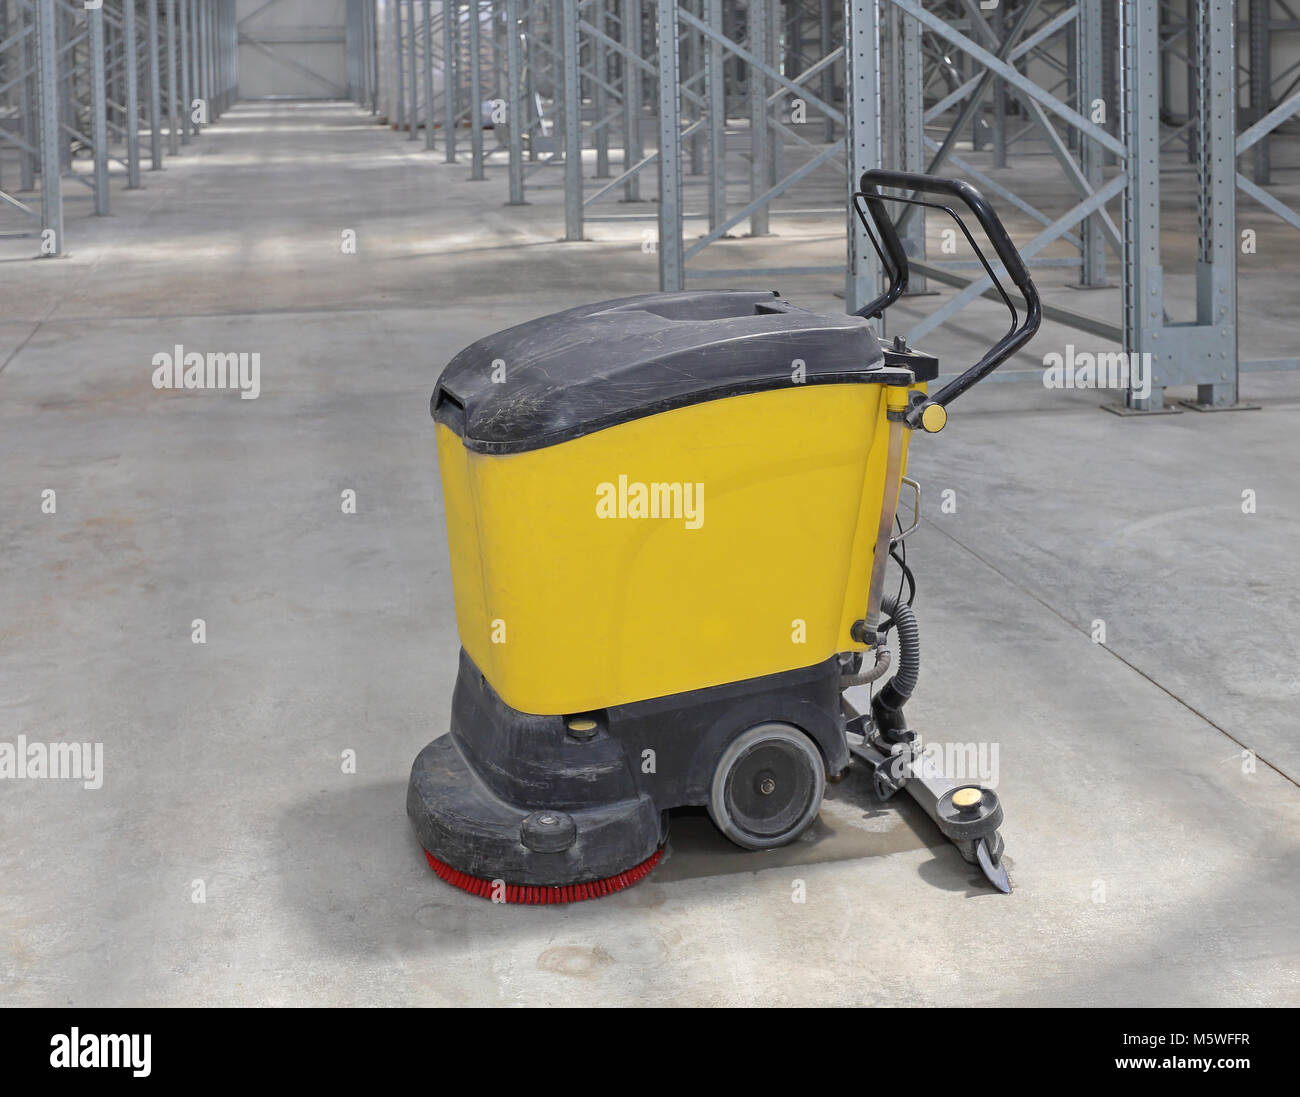 Walk Behind Machine Scrubber For Cleaning Floor In Warehouse Stock